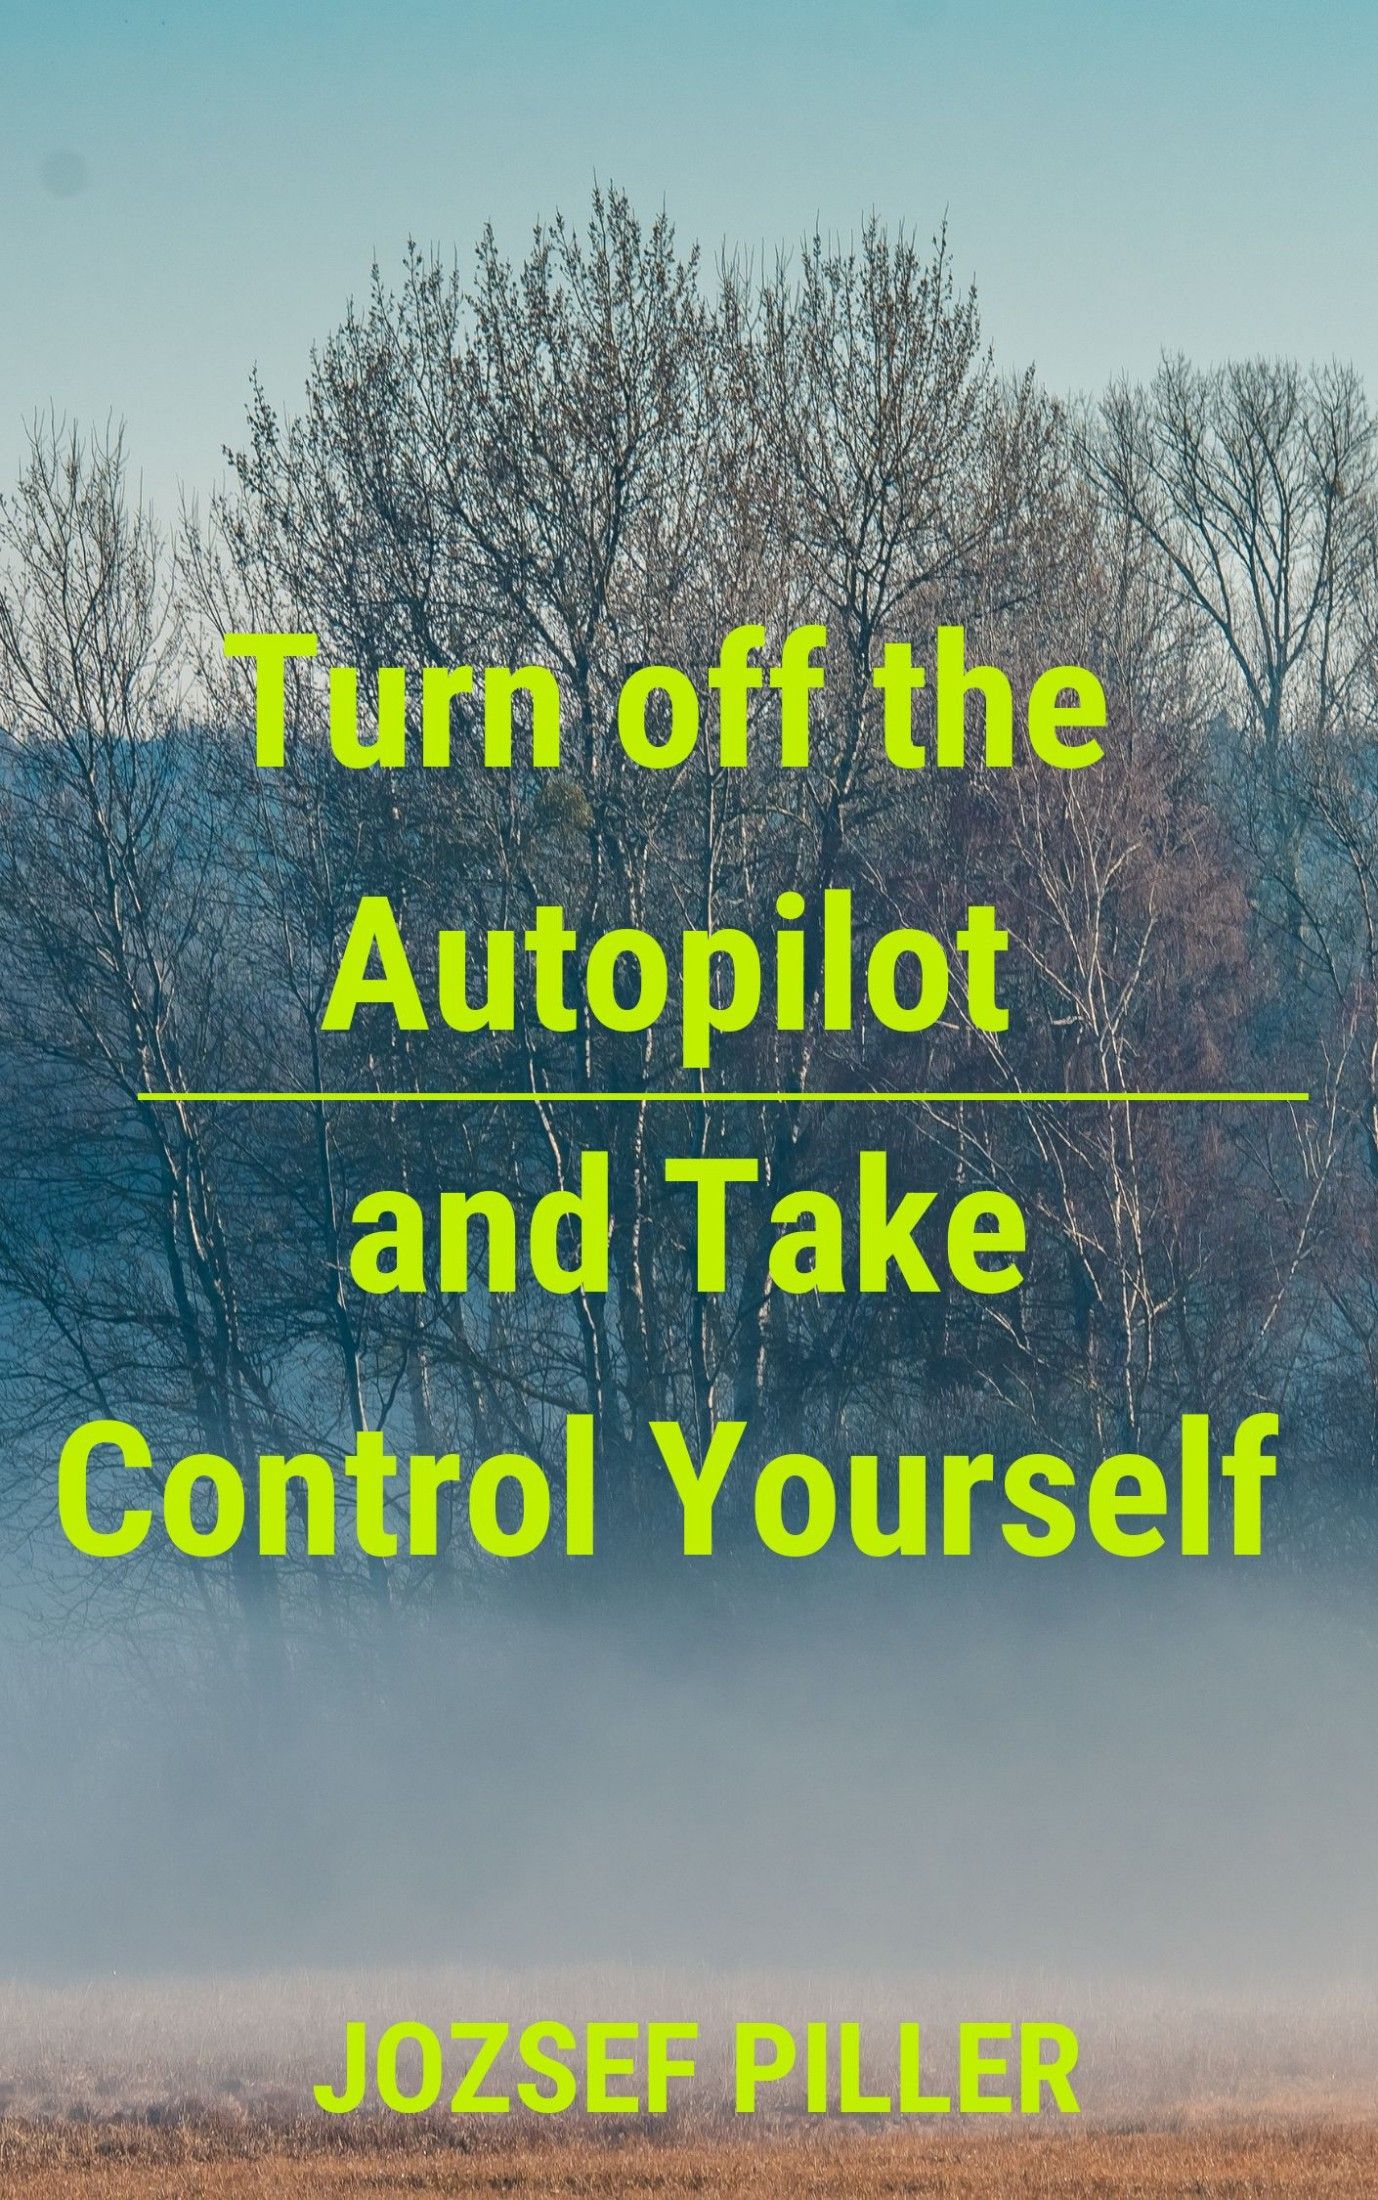 Turn off the autopilot and Take control yourself, eBook by Jozsef Piller